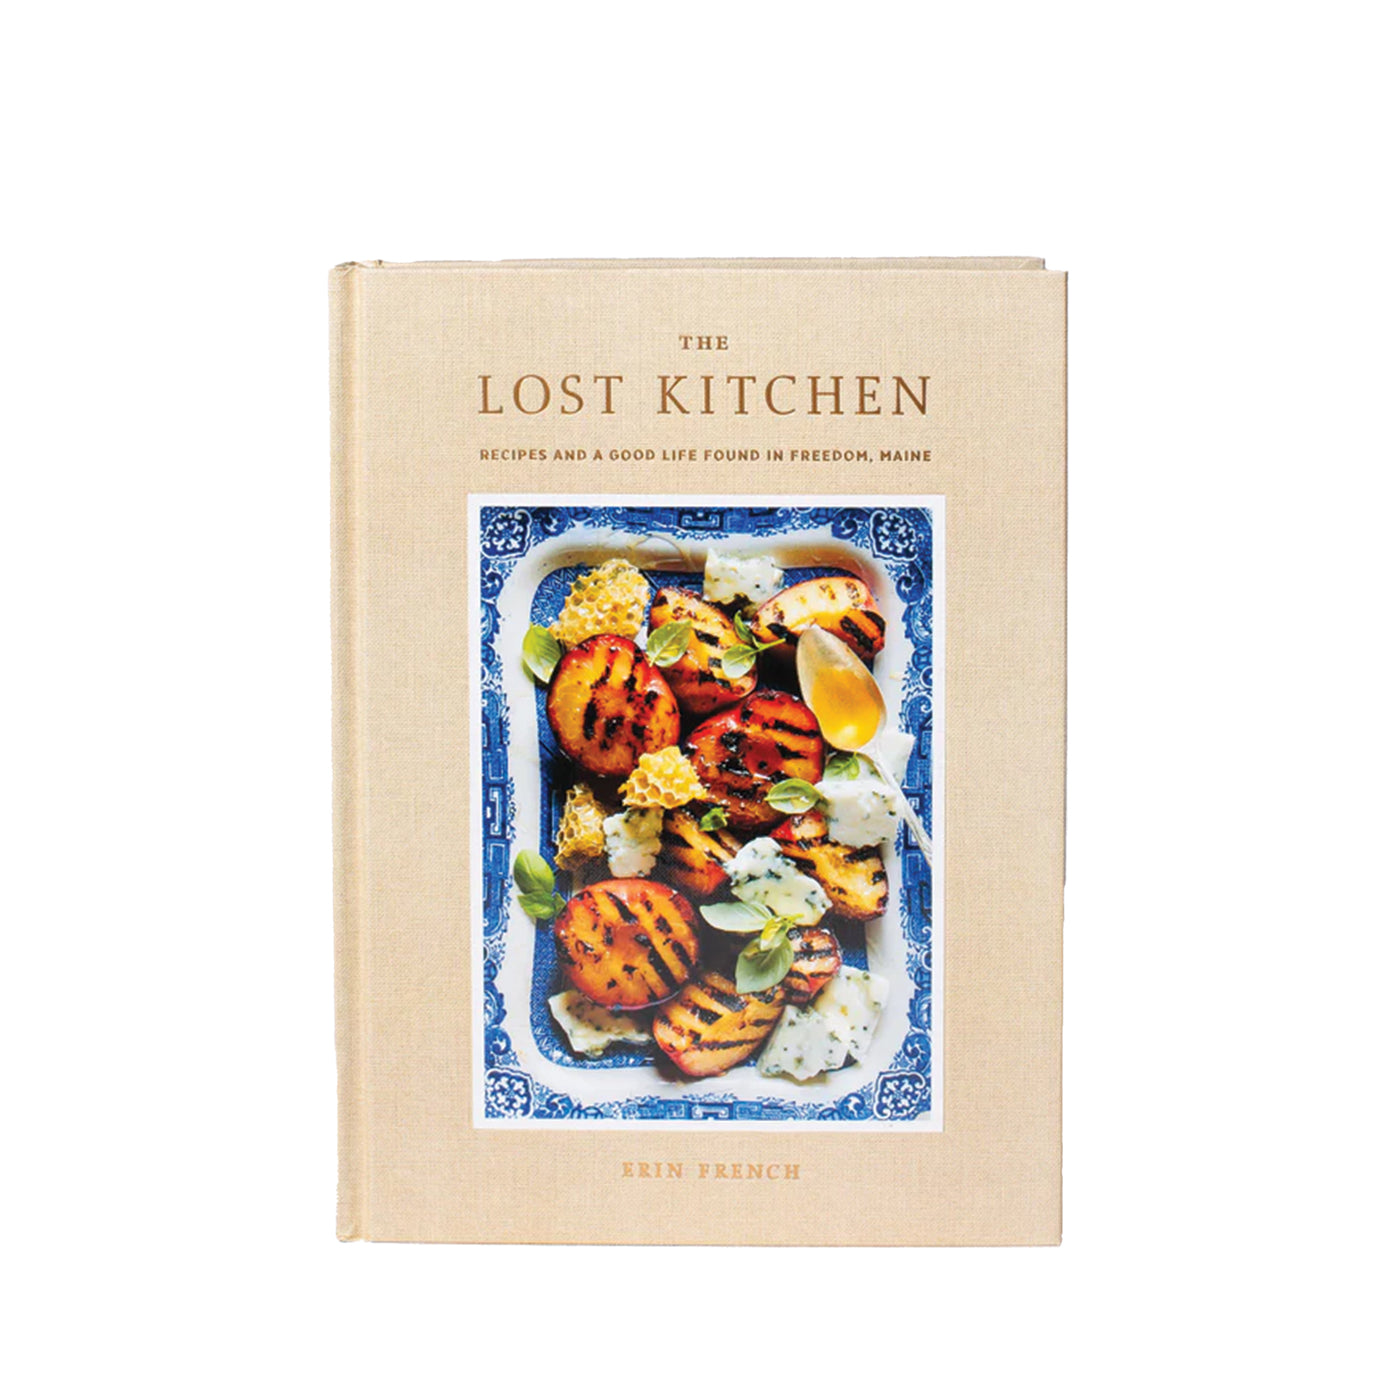 Erin French | The Lost Kitchen' cookbook